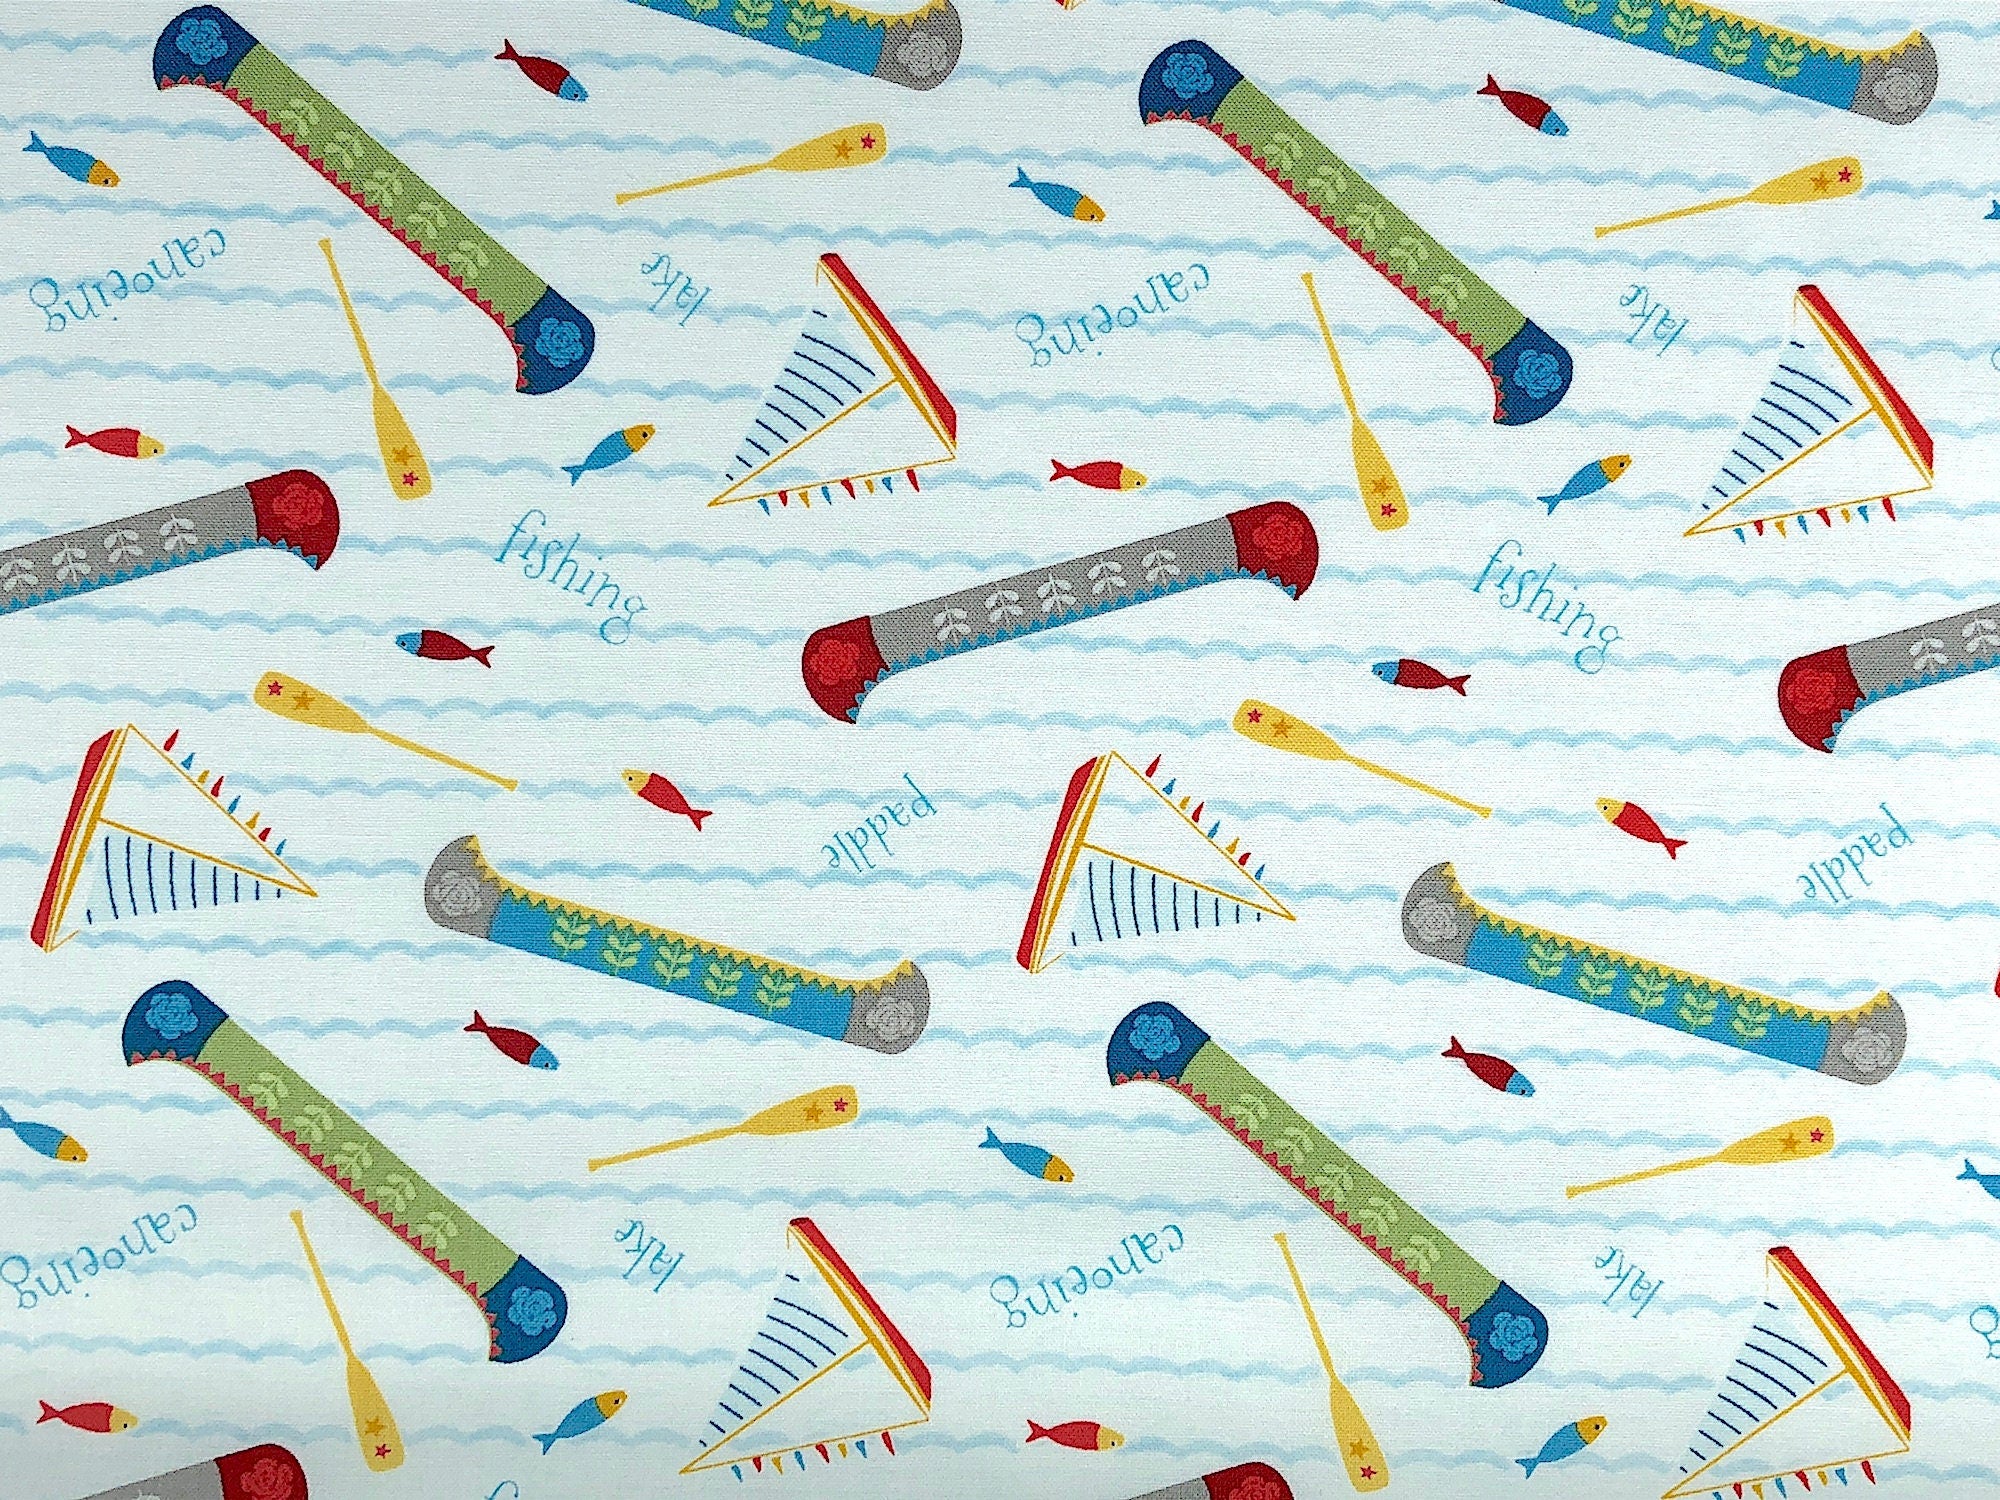 This fabric is called Let's go Glamping and is covered with canoes, oars, sail boats, and fish. There are rows of waves across the fabric. Lake and canoeing are printing throughout the fabric.